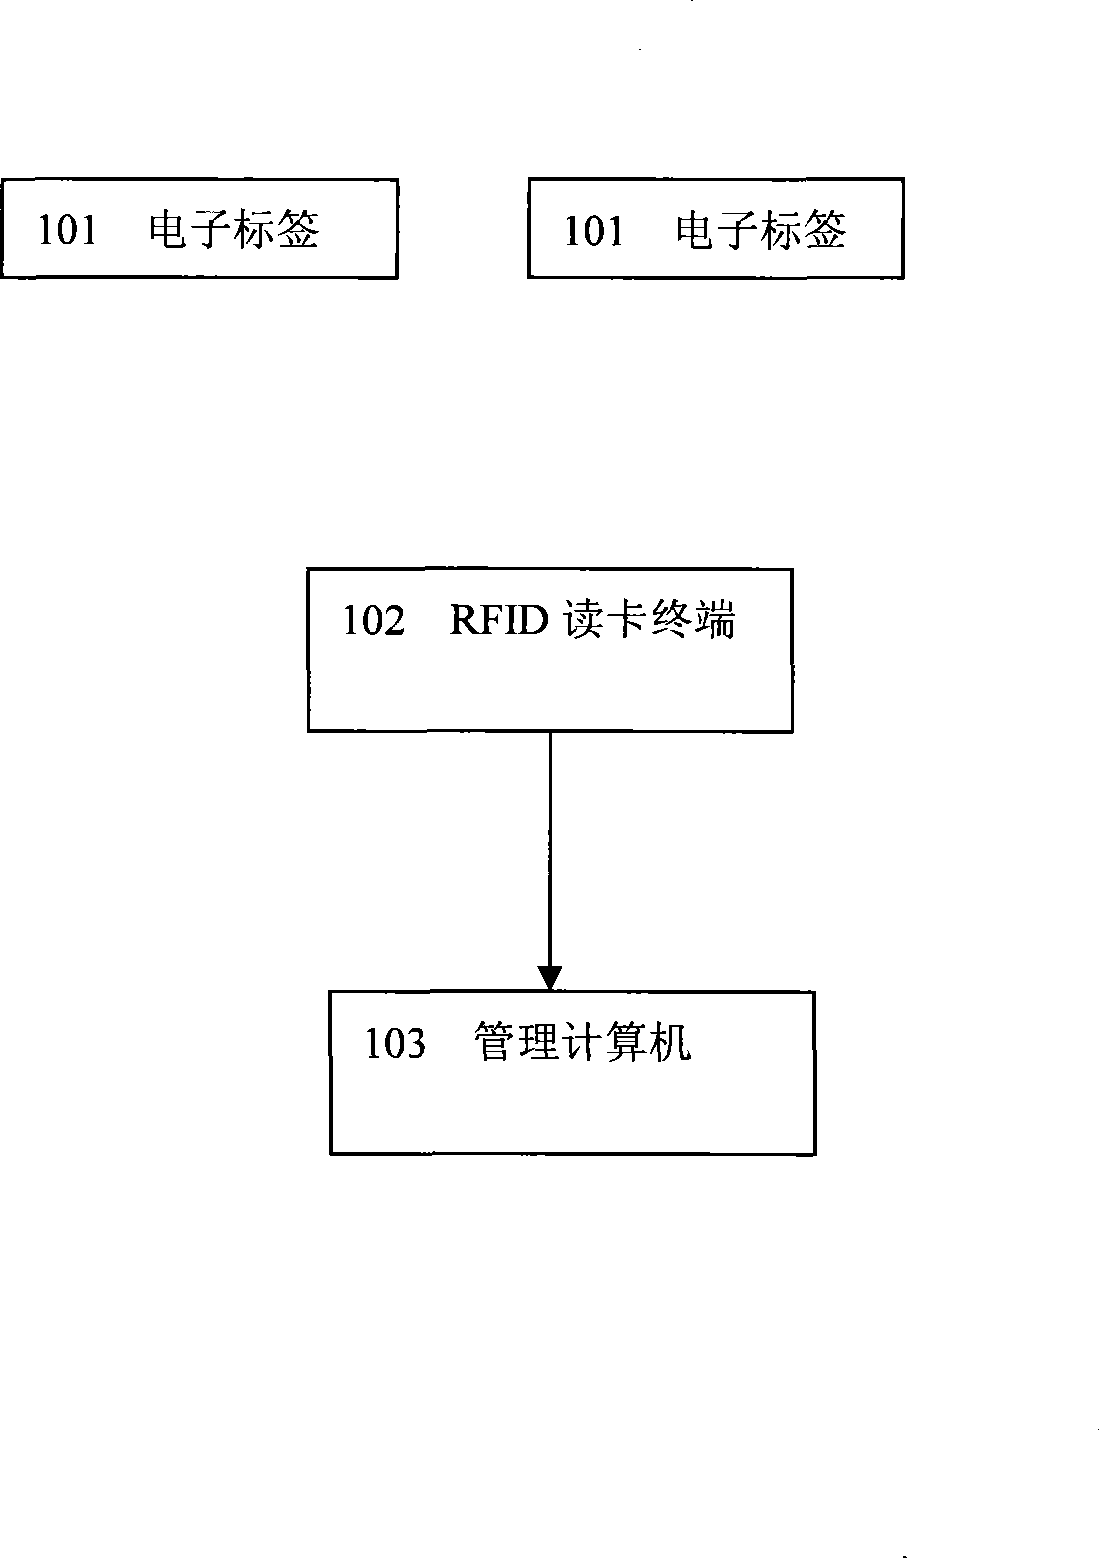 Wireless radio frequency recognition device with bidirectional data transmission and statistics